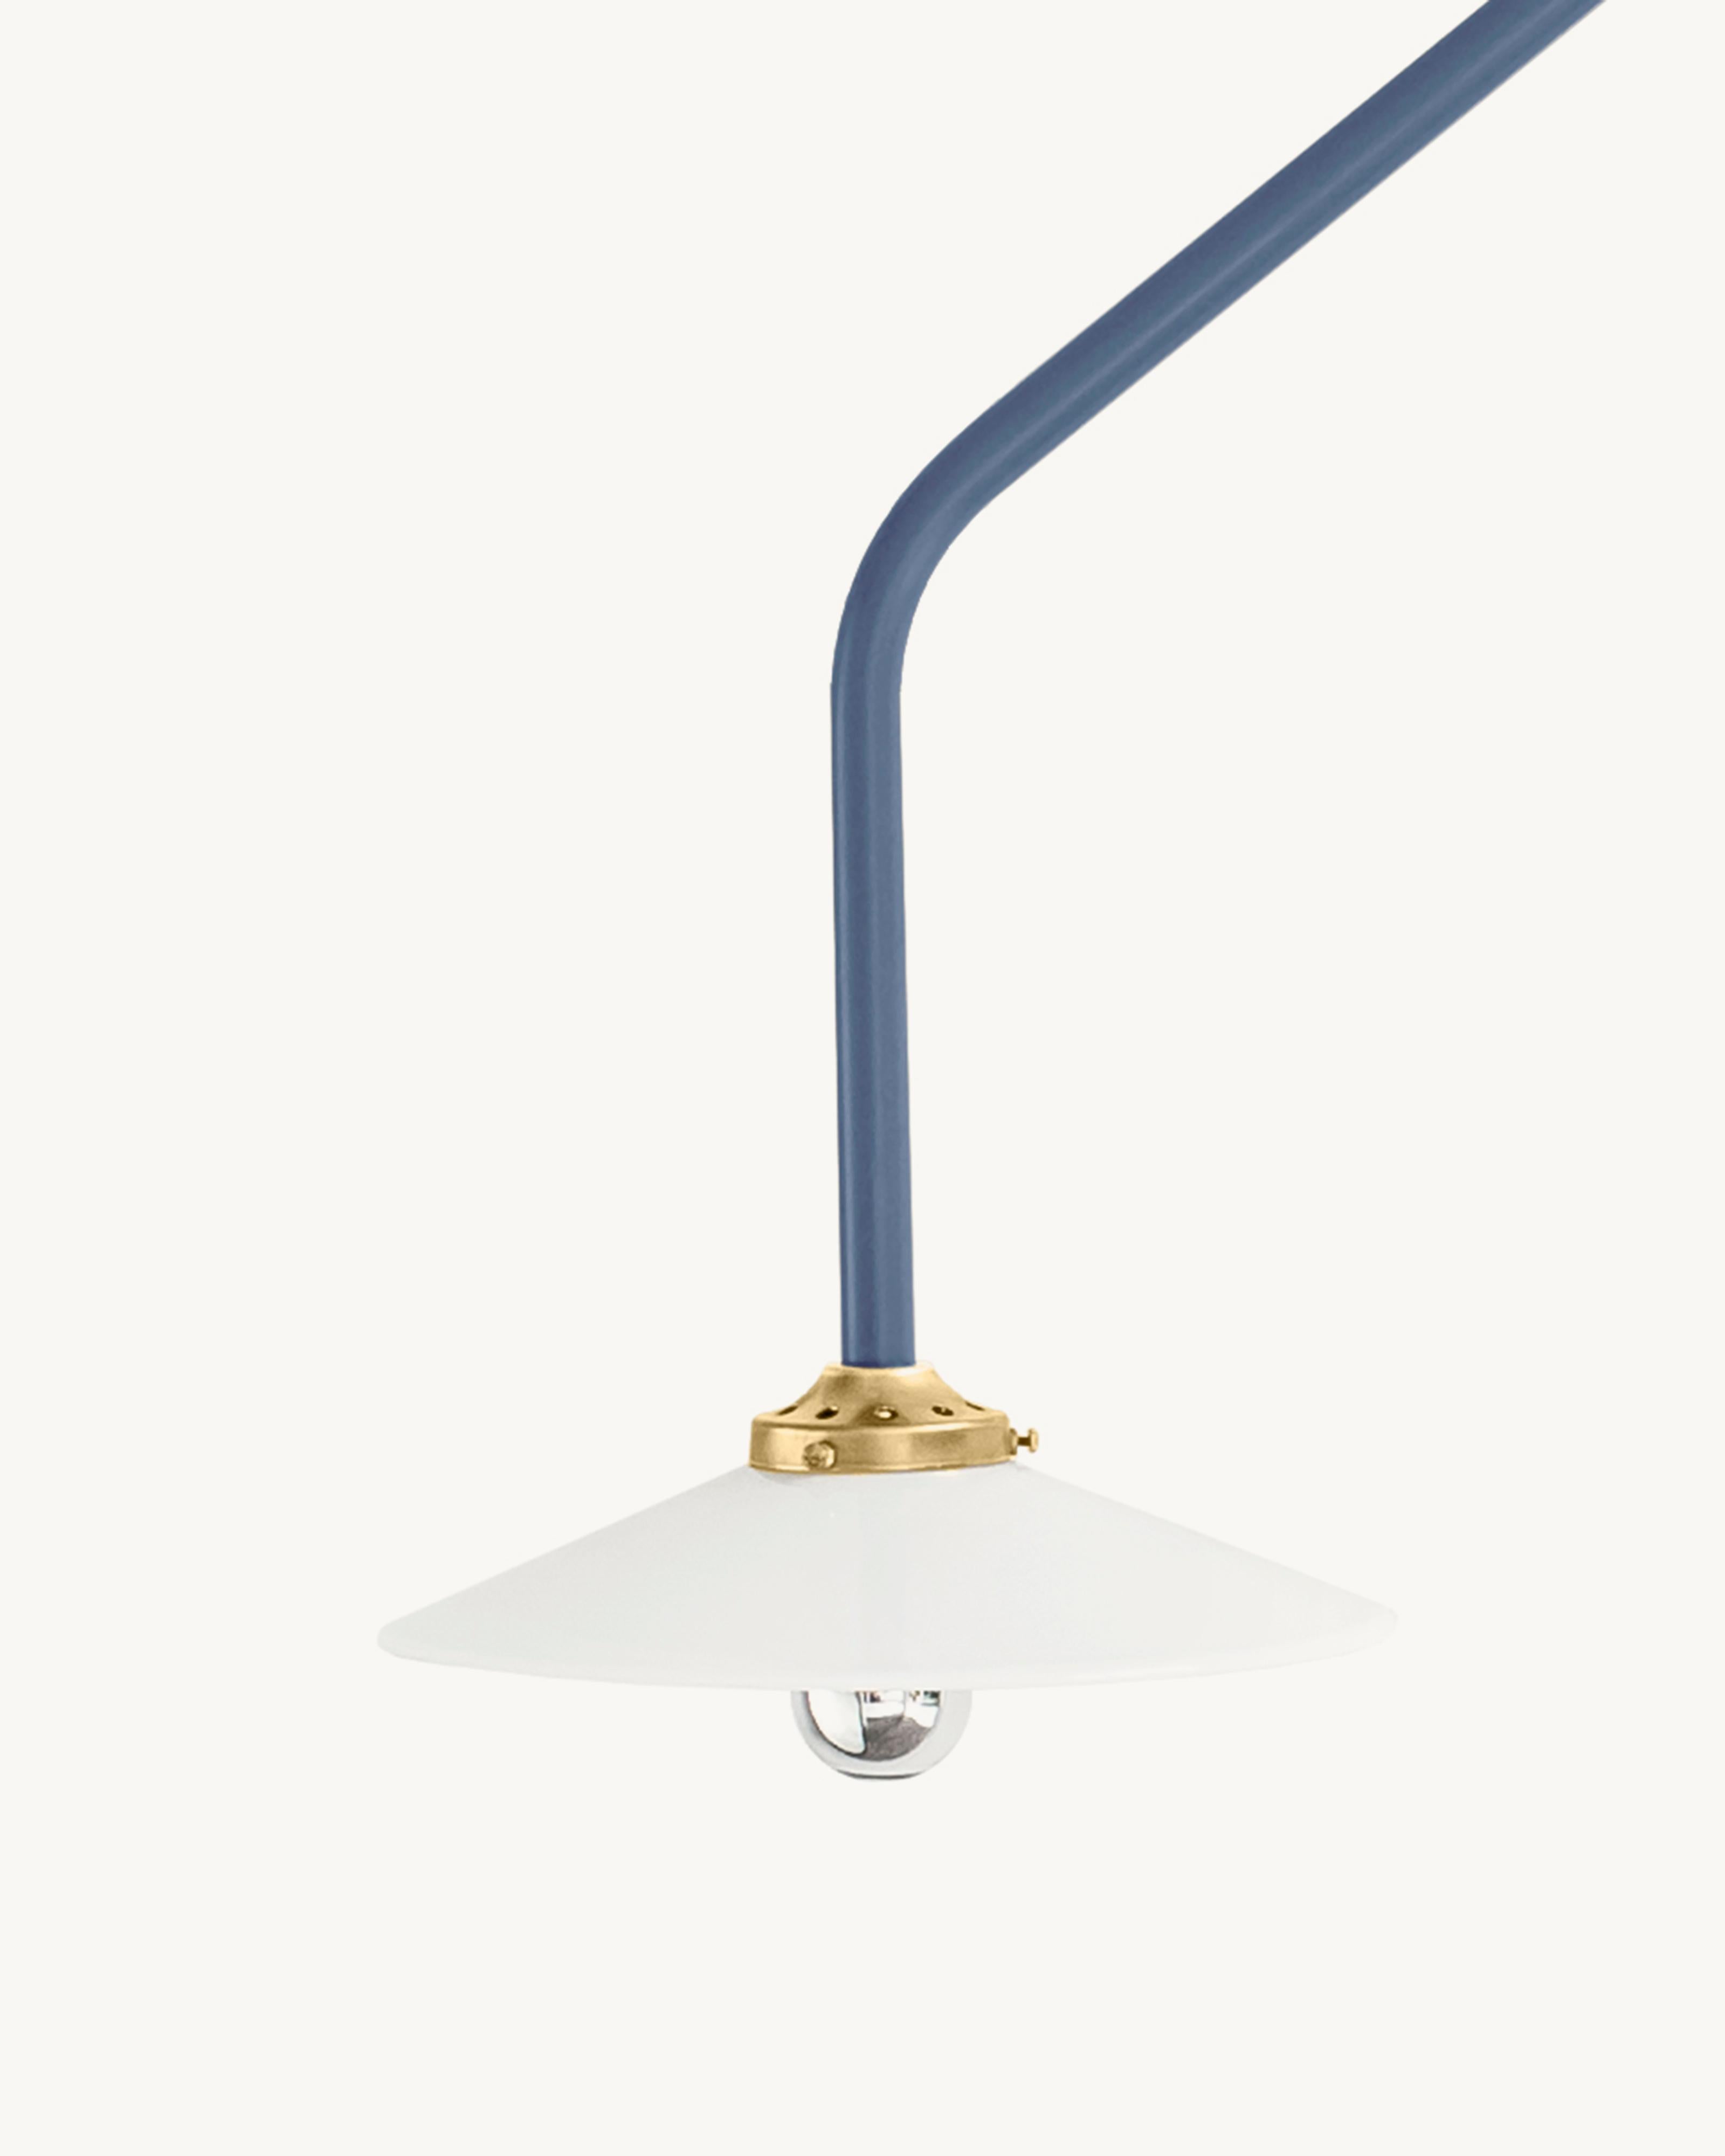 Steel Contemporary Hanging Lamp N°4 by Muller Van Severen x Valerie Objects, Brass For Sale